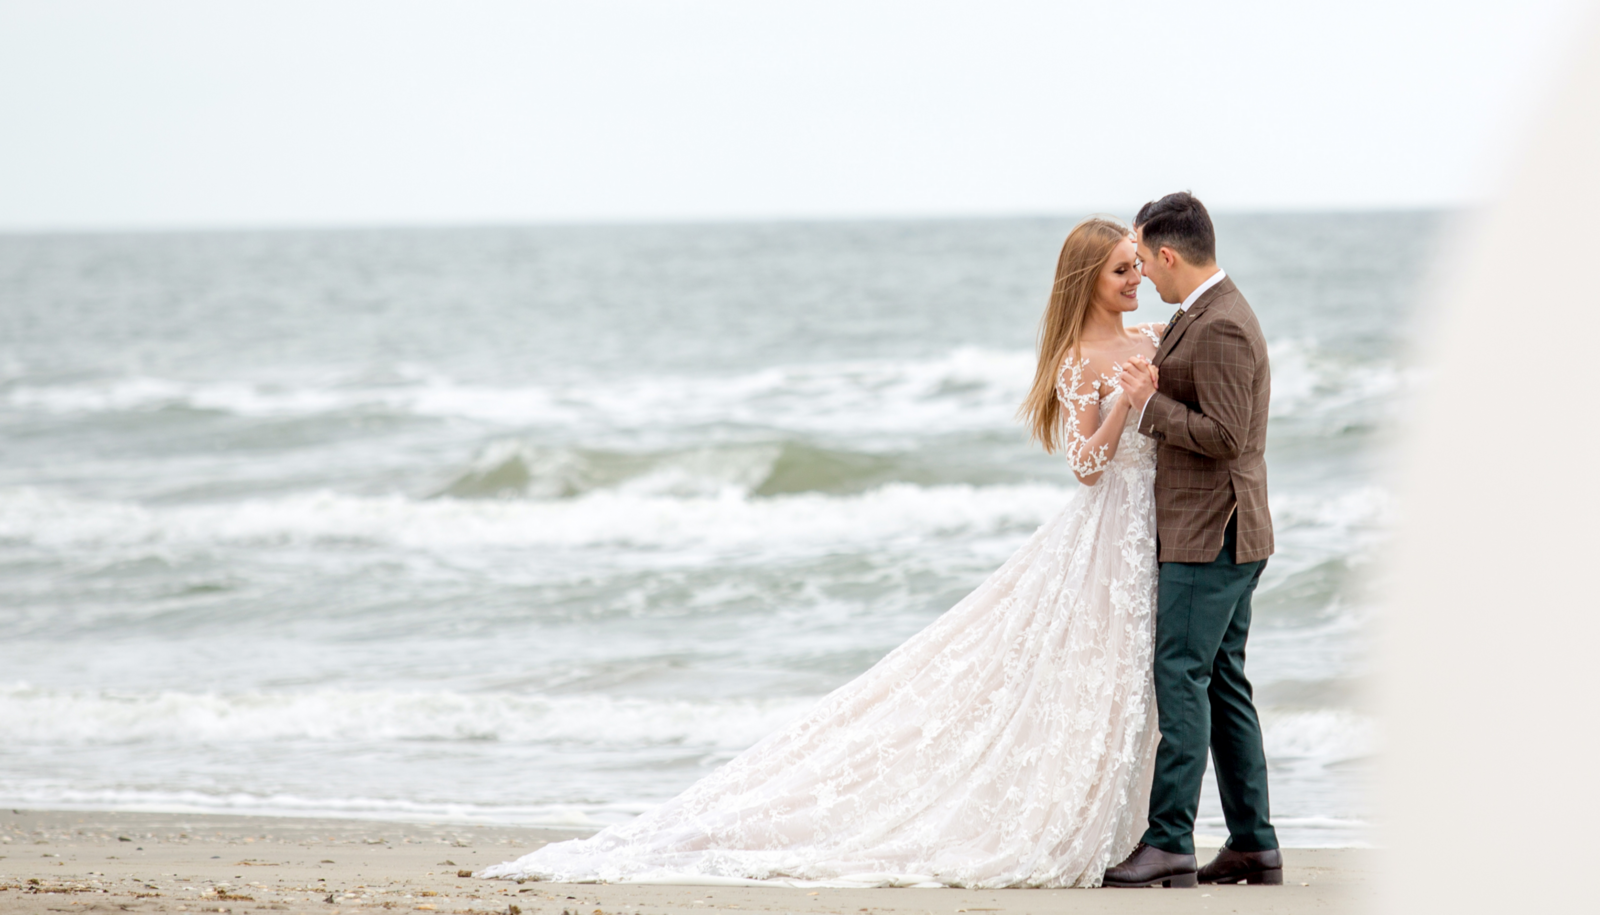 Bride and Groom slow dancing on the beach by the ocean.